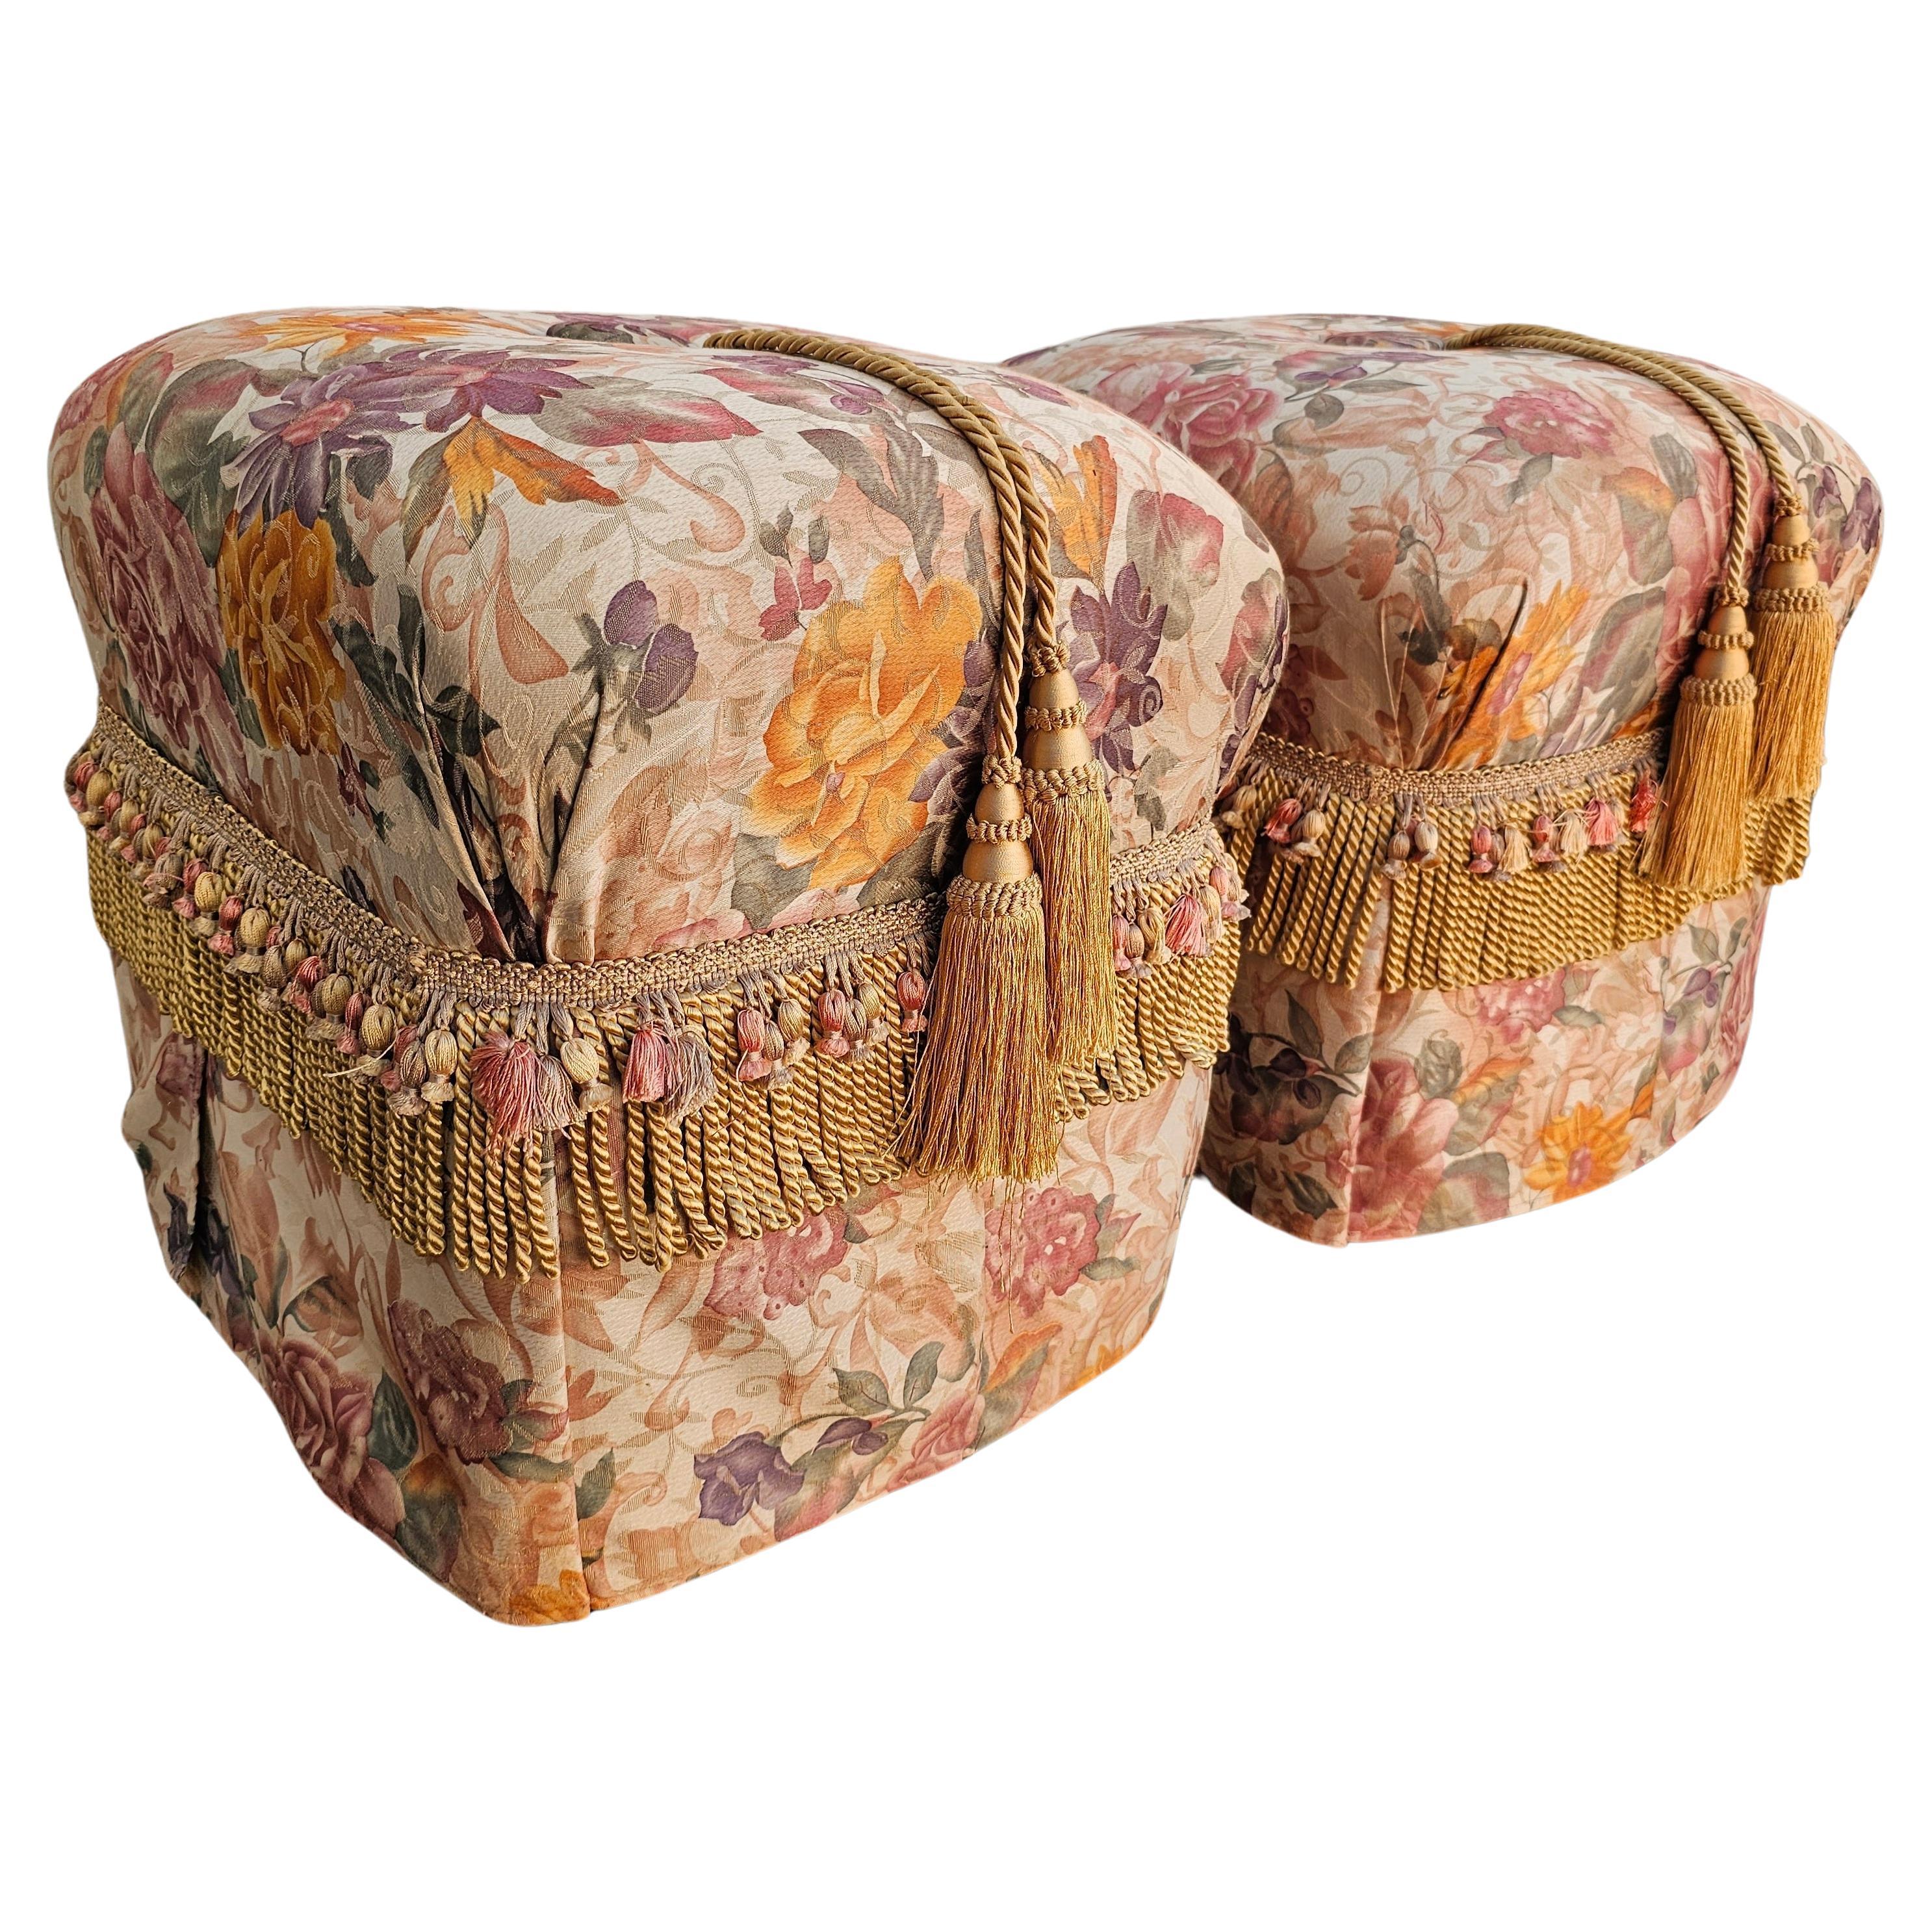 Polyester 20th Century Modern Upholstered Decorative Footstool Ottomans, Pair For Sale